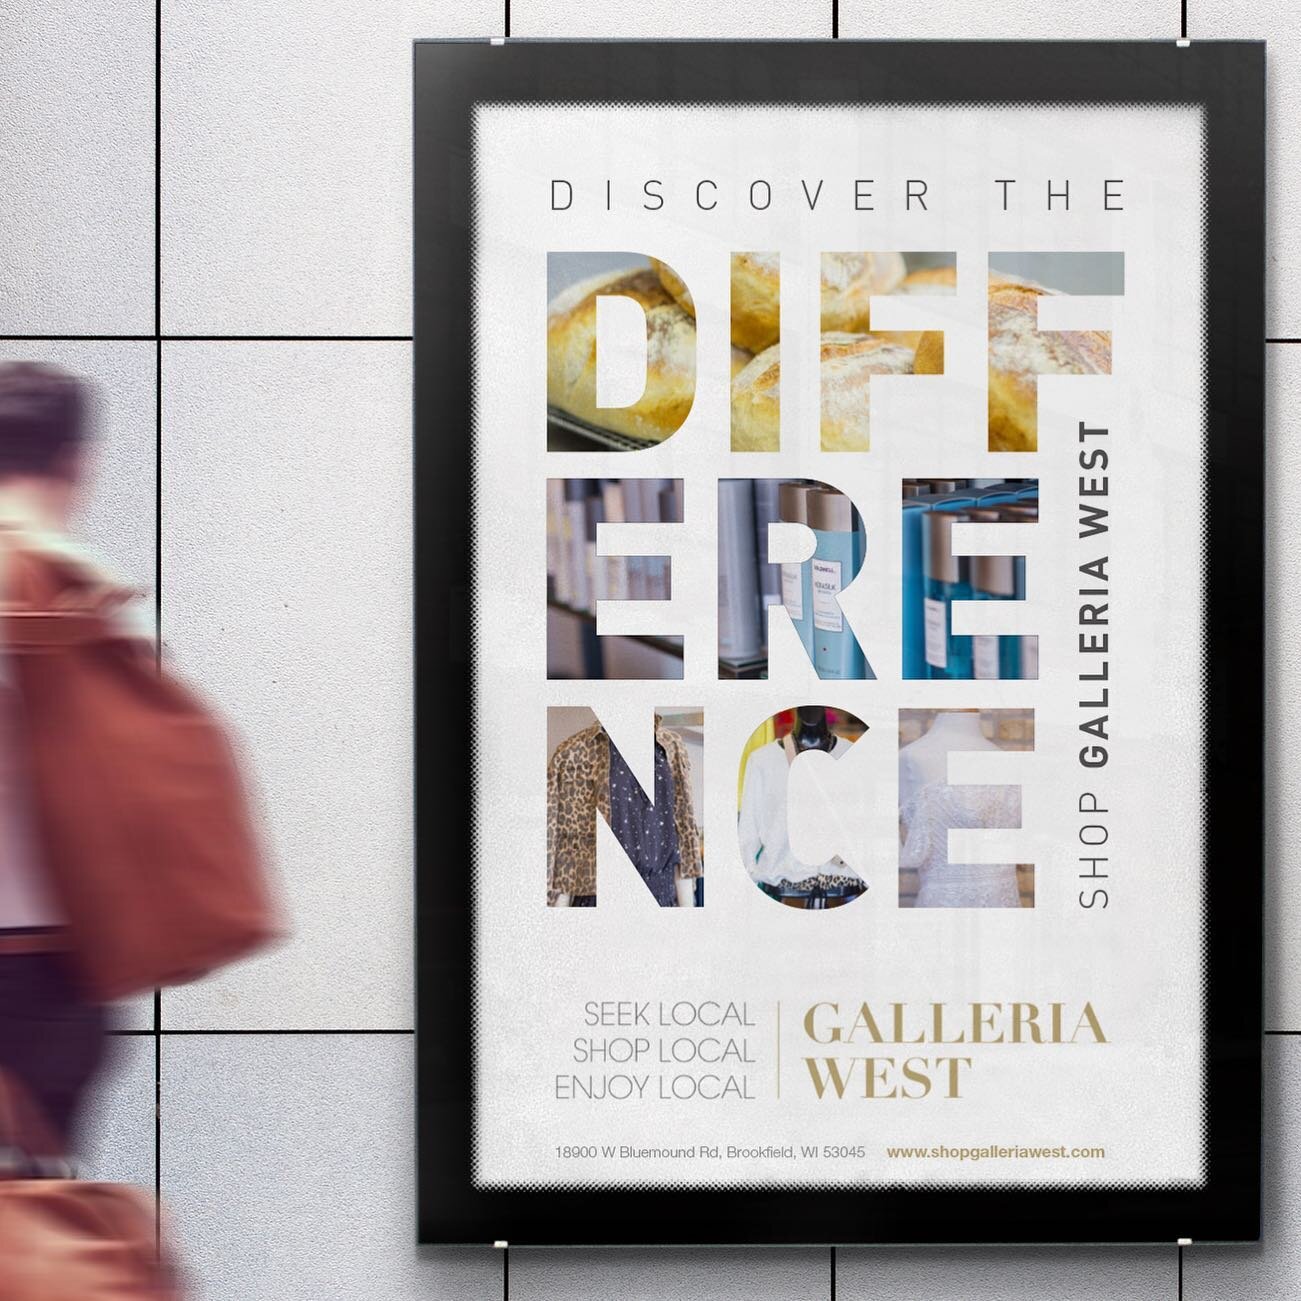 Time to hit the shops.
Poster design idea for Galleria West in Brookfield, Wisconsin 

@thirdeyelocal 

#graphicdesign #graphicdesigner #graphicdesigncentral #design #designer #advert #posterdesign #shop #shopping #clothes #sale #mall #typography #ty